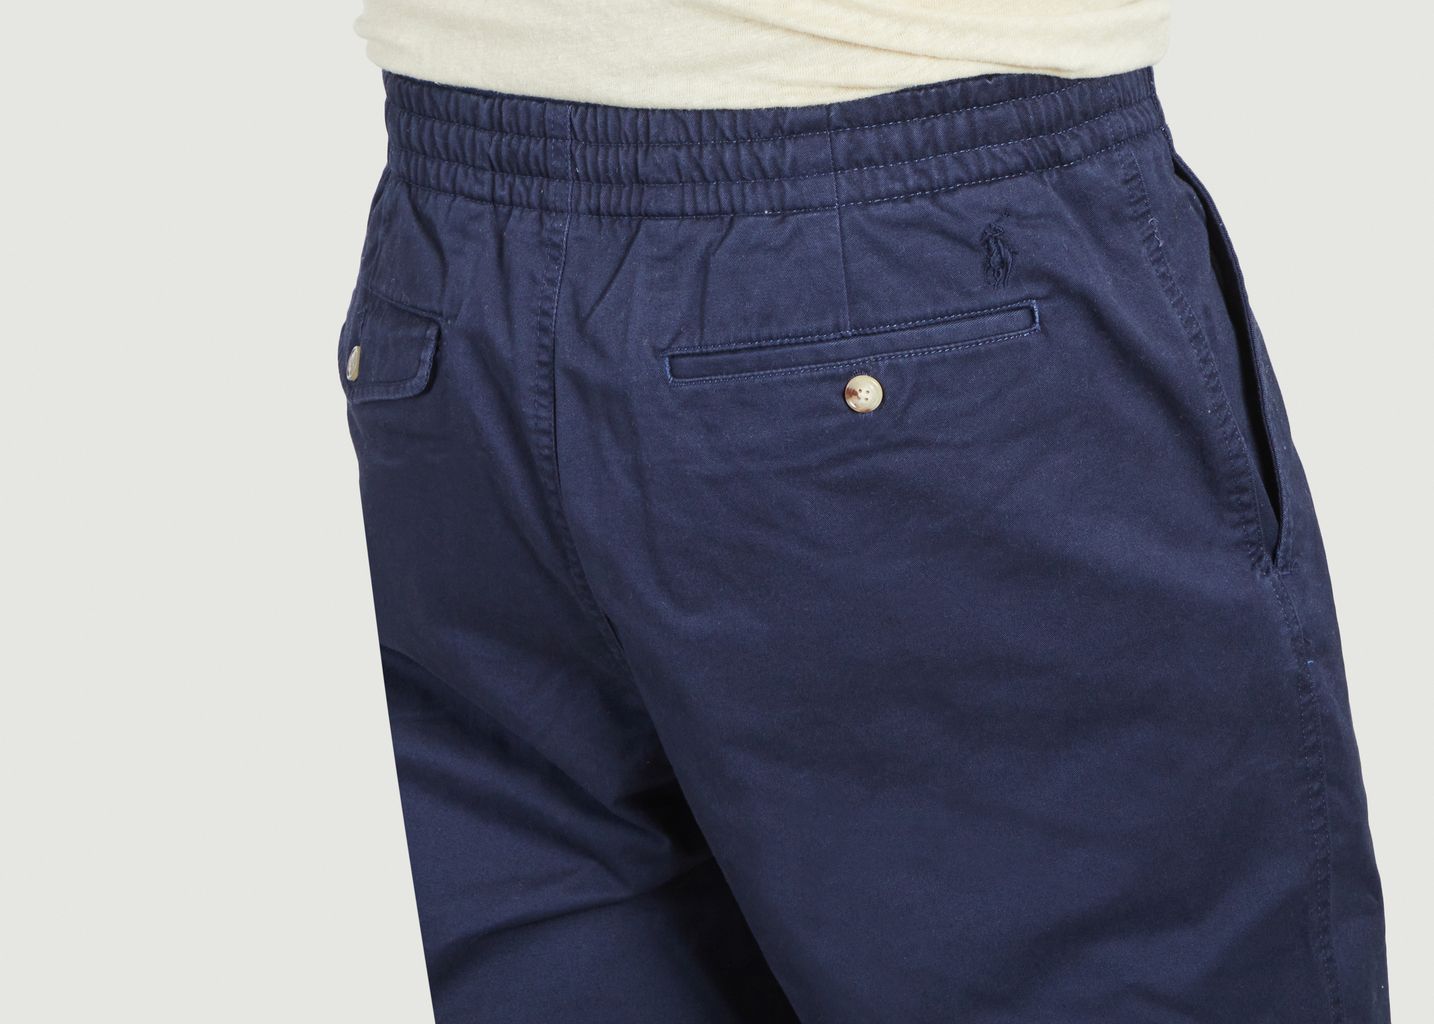 Classic Fit Stretch Pants with elastic waistband - Polo Ralph Lauren